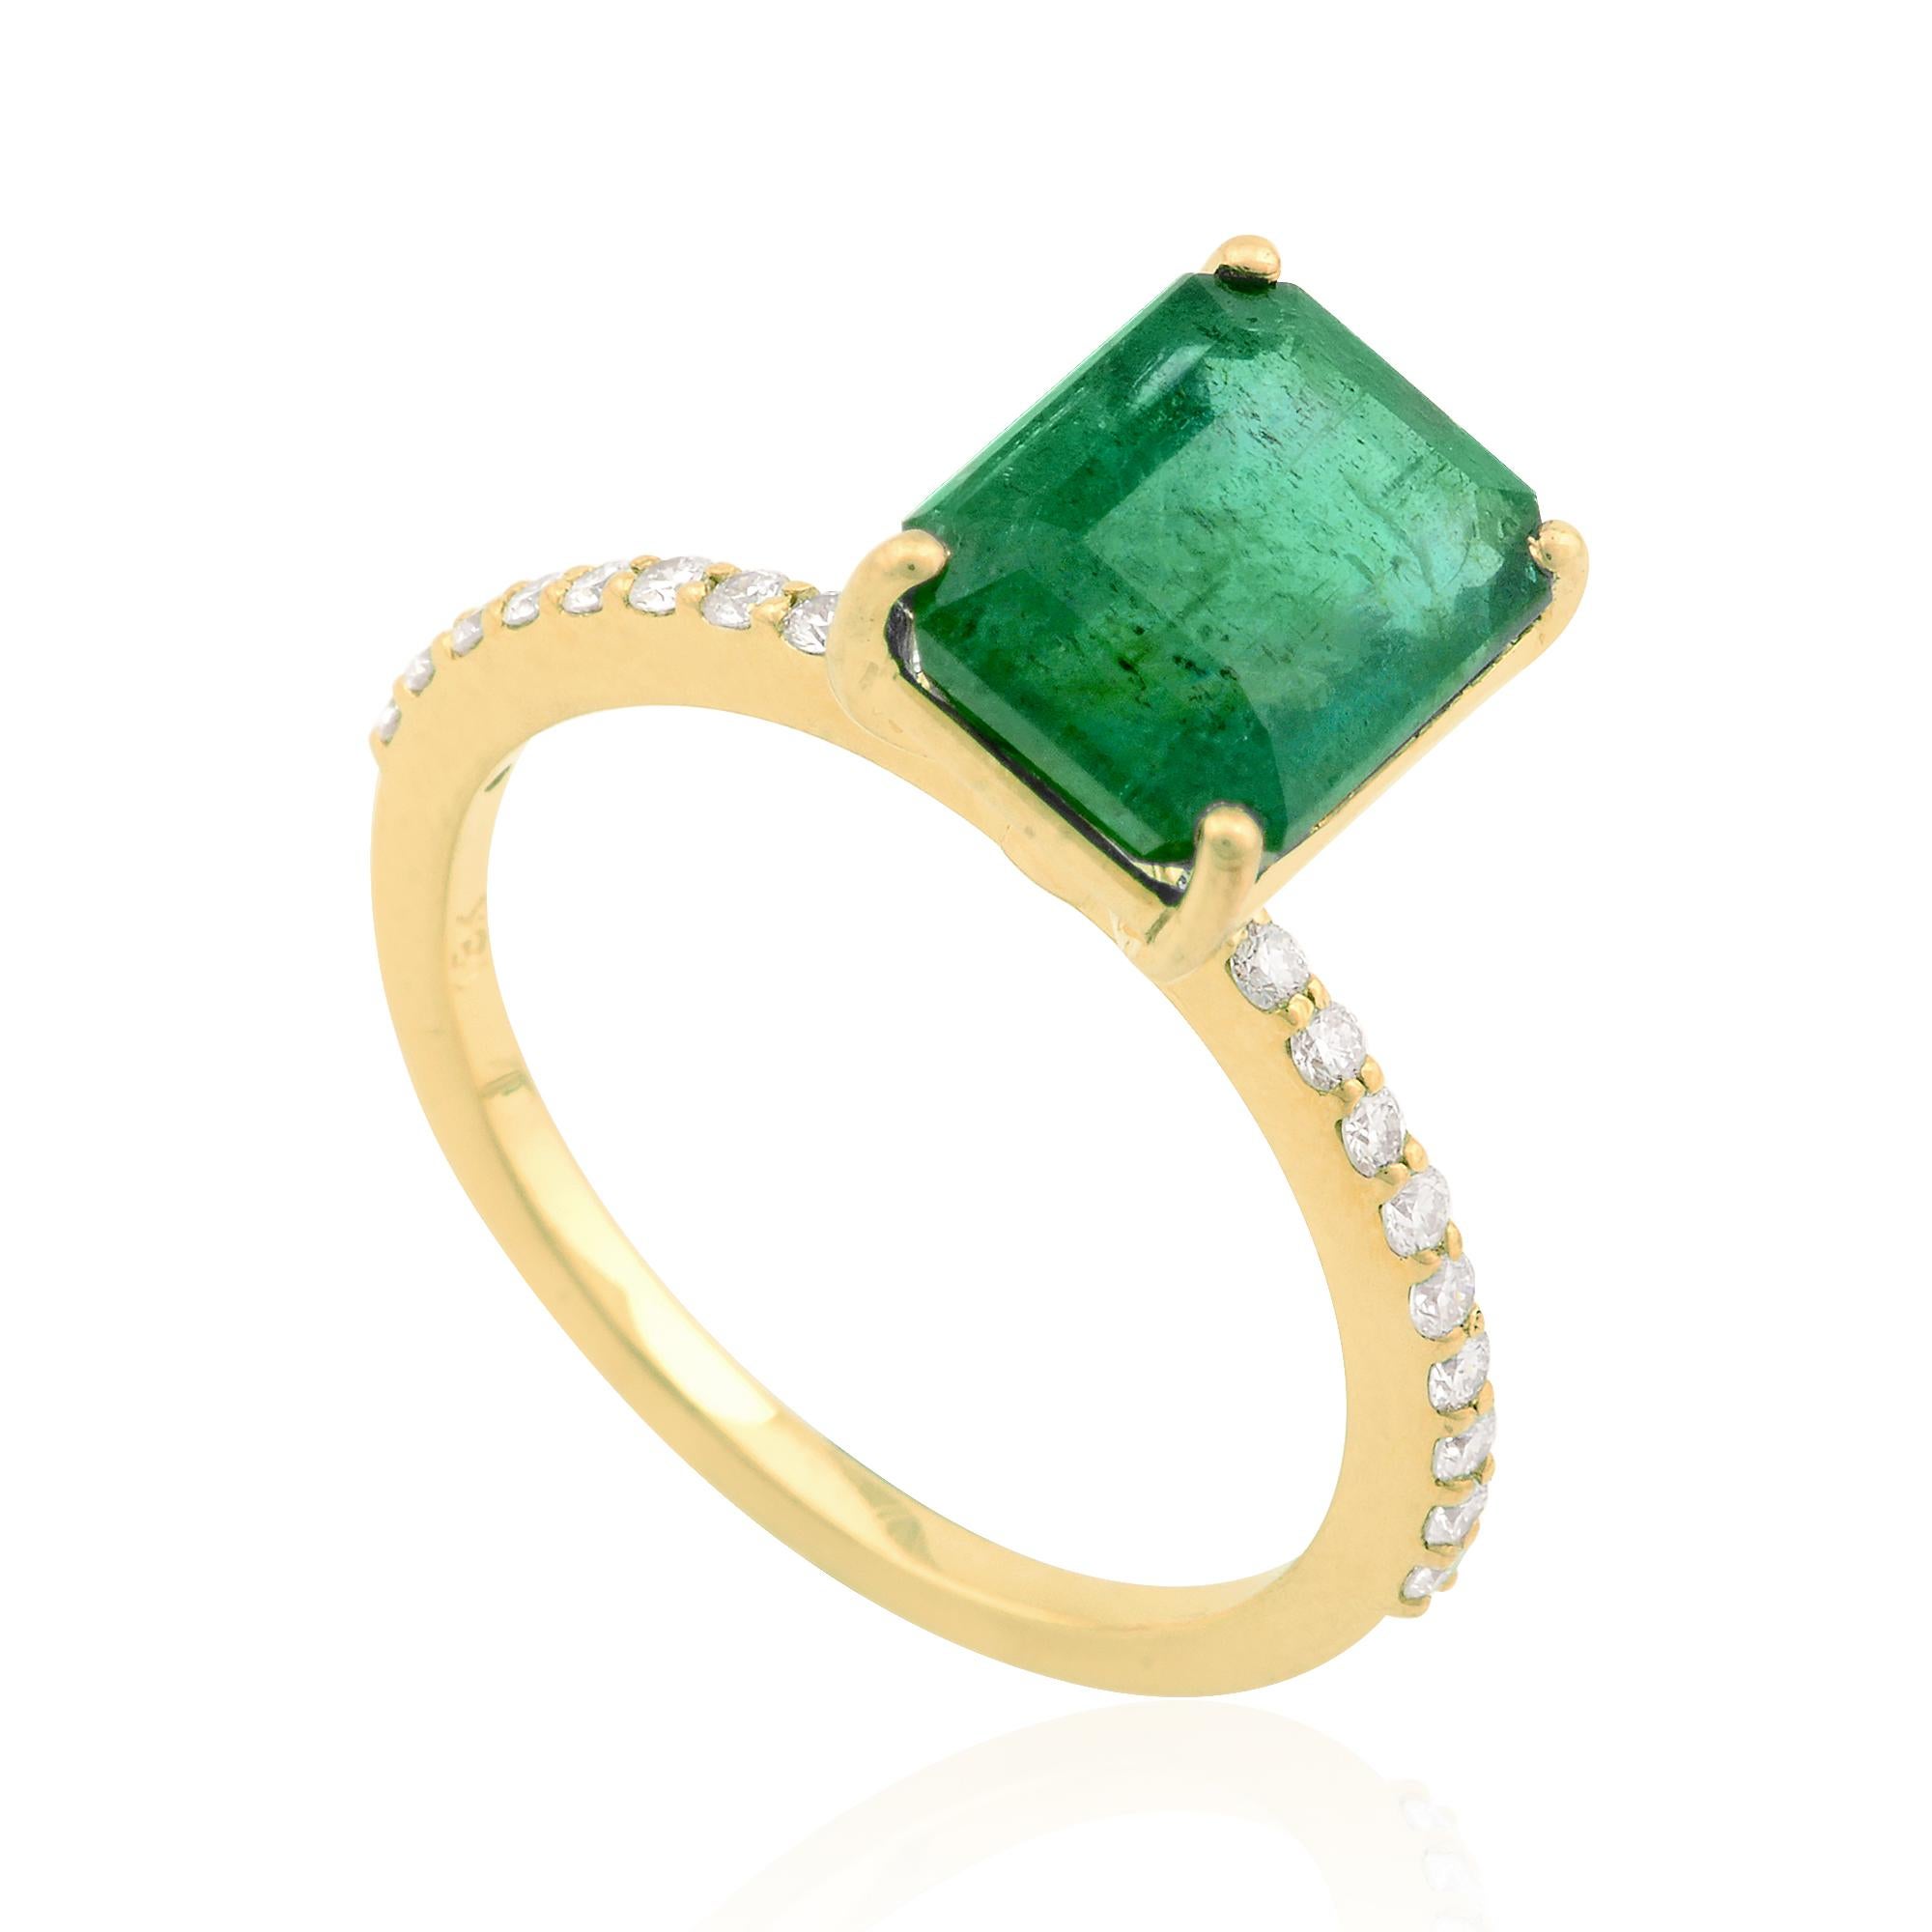 For Sale:  Natural Emerald Gemstone Ring Diamond Pave Solid 18k Yellow Gold Jewelry 3